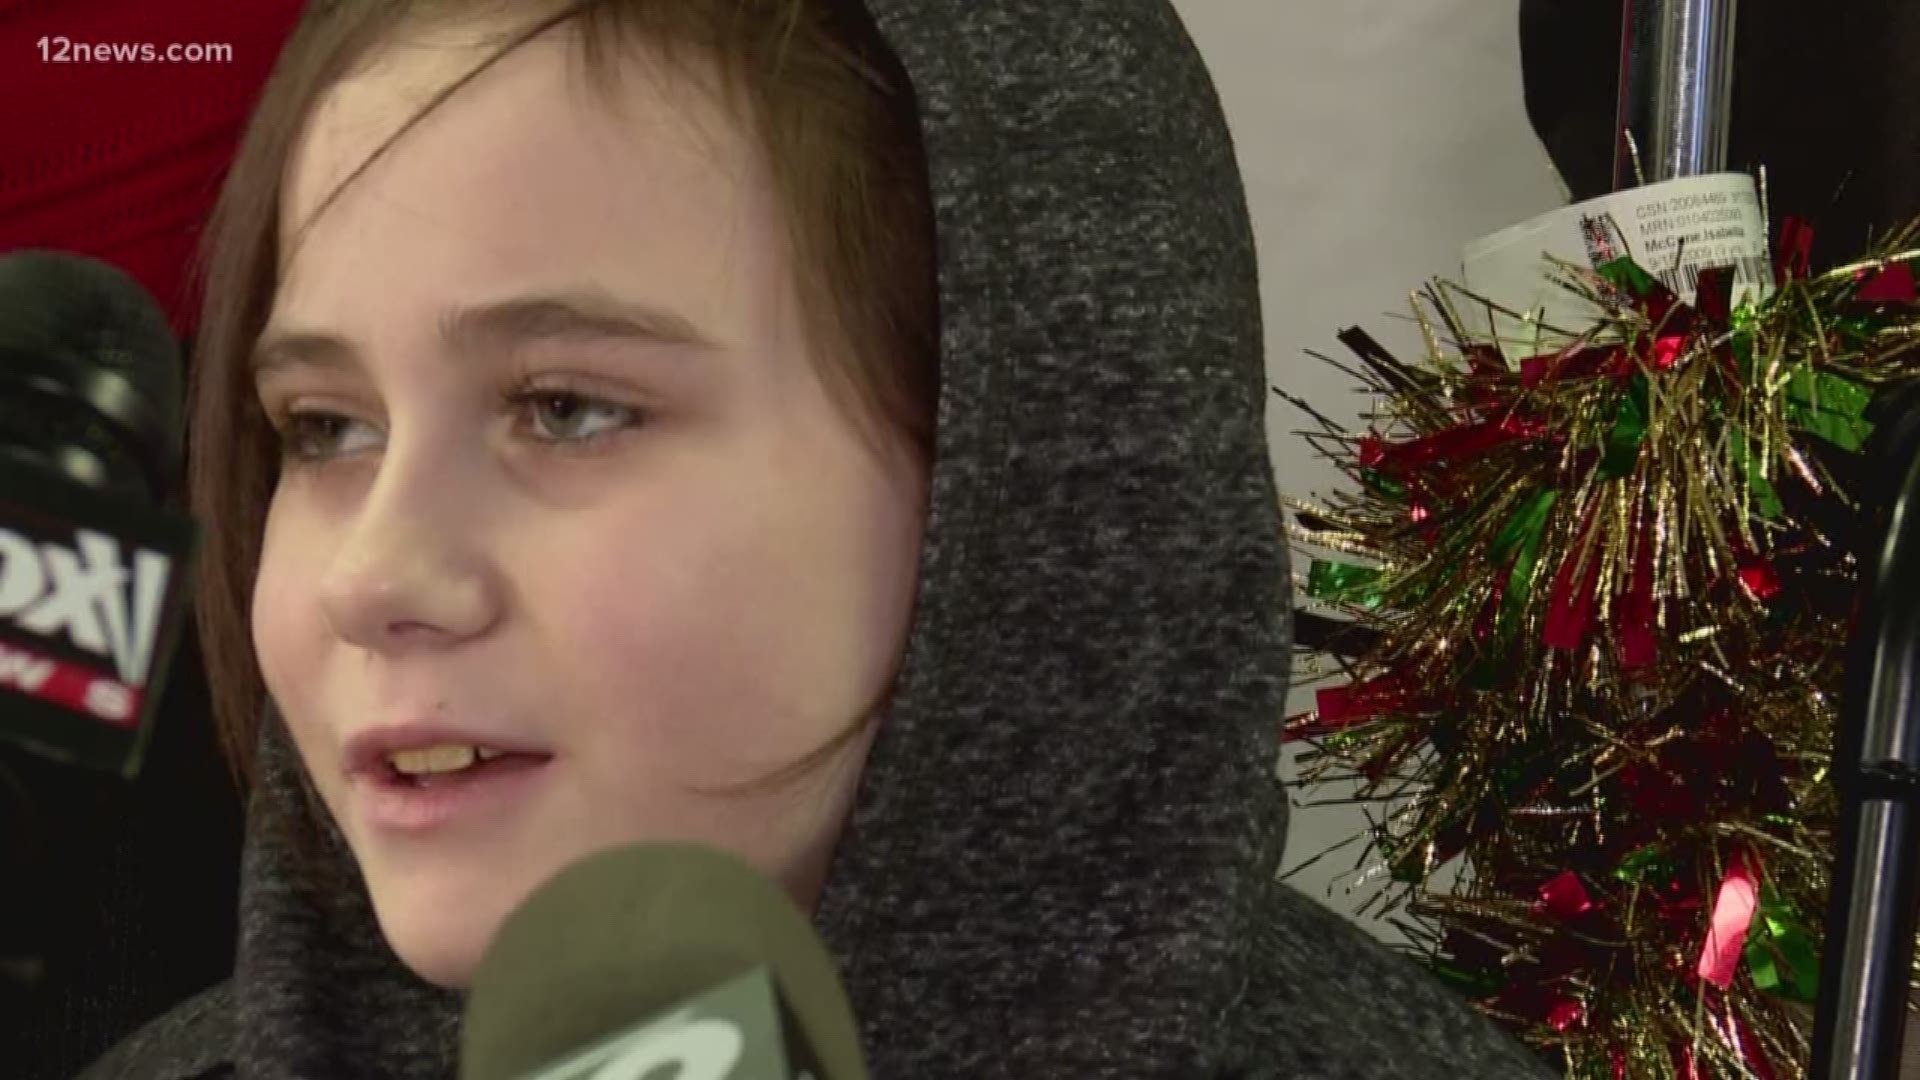 9-year-old Isabella McCune is finally going home for the holidays after nine months in the Arizona Burn Center. Today, Isabella thanked everyone who helped her on her journey to recovery.